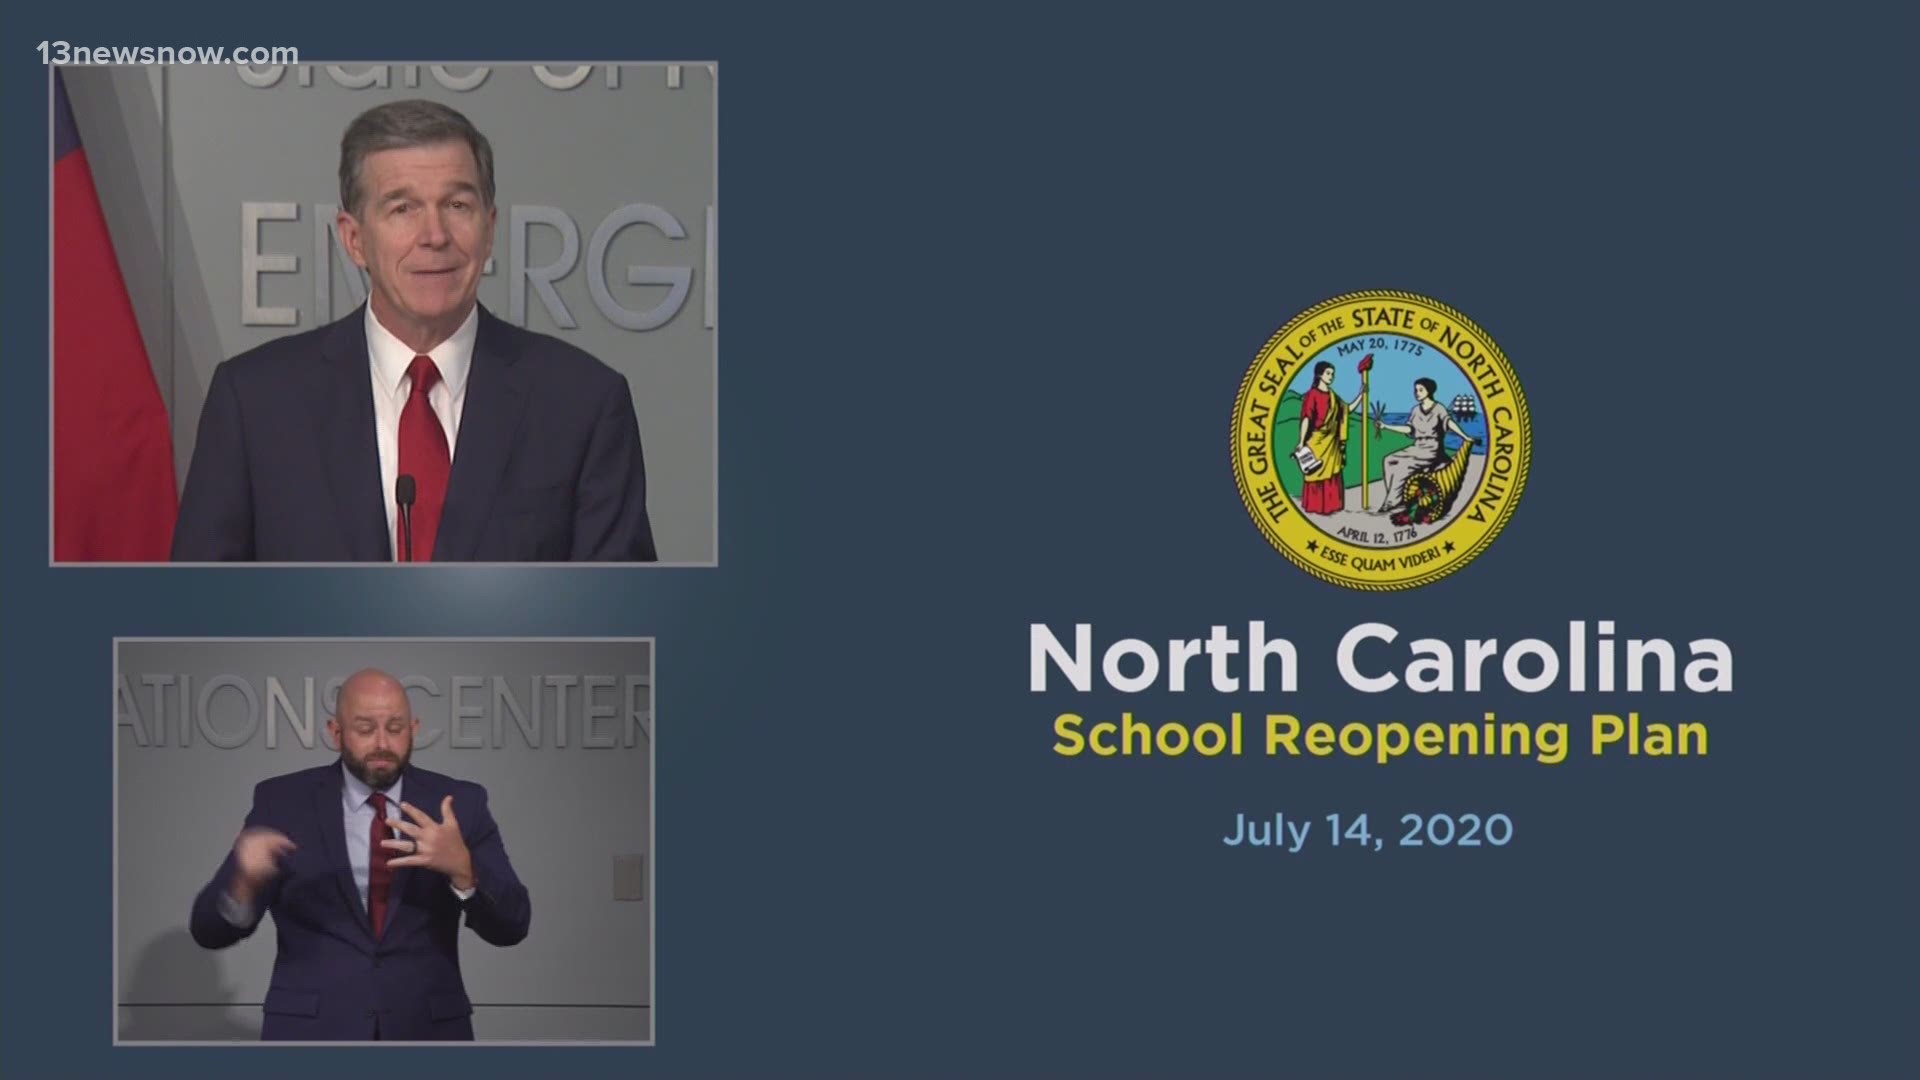 The governor said that North Carolina schools will be open this fall for remote learning and in-person instruction.